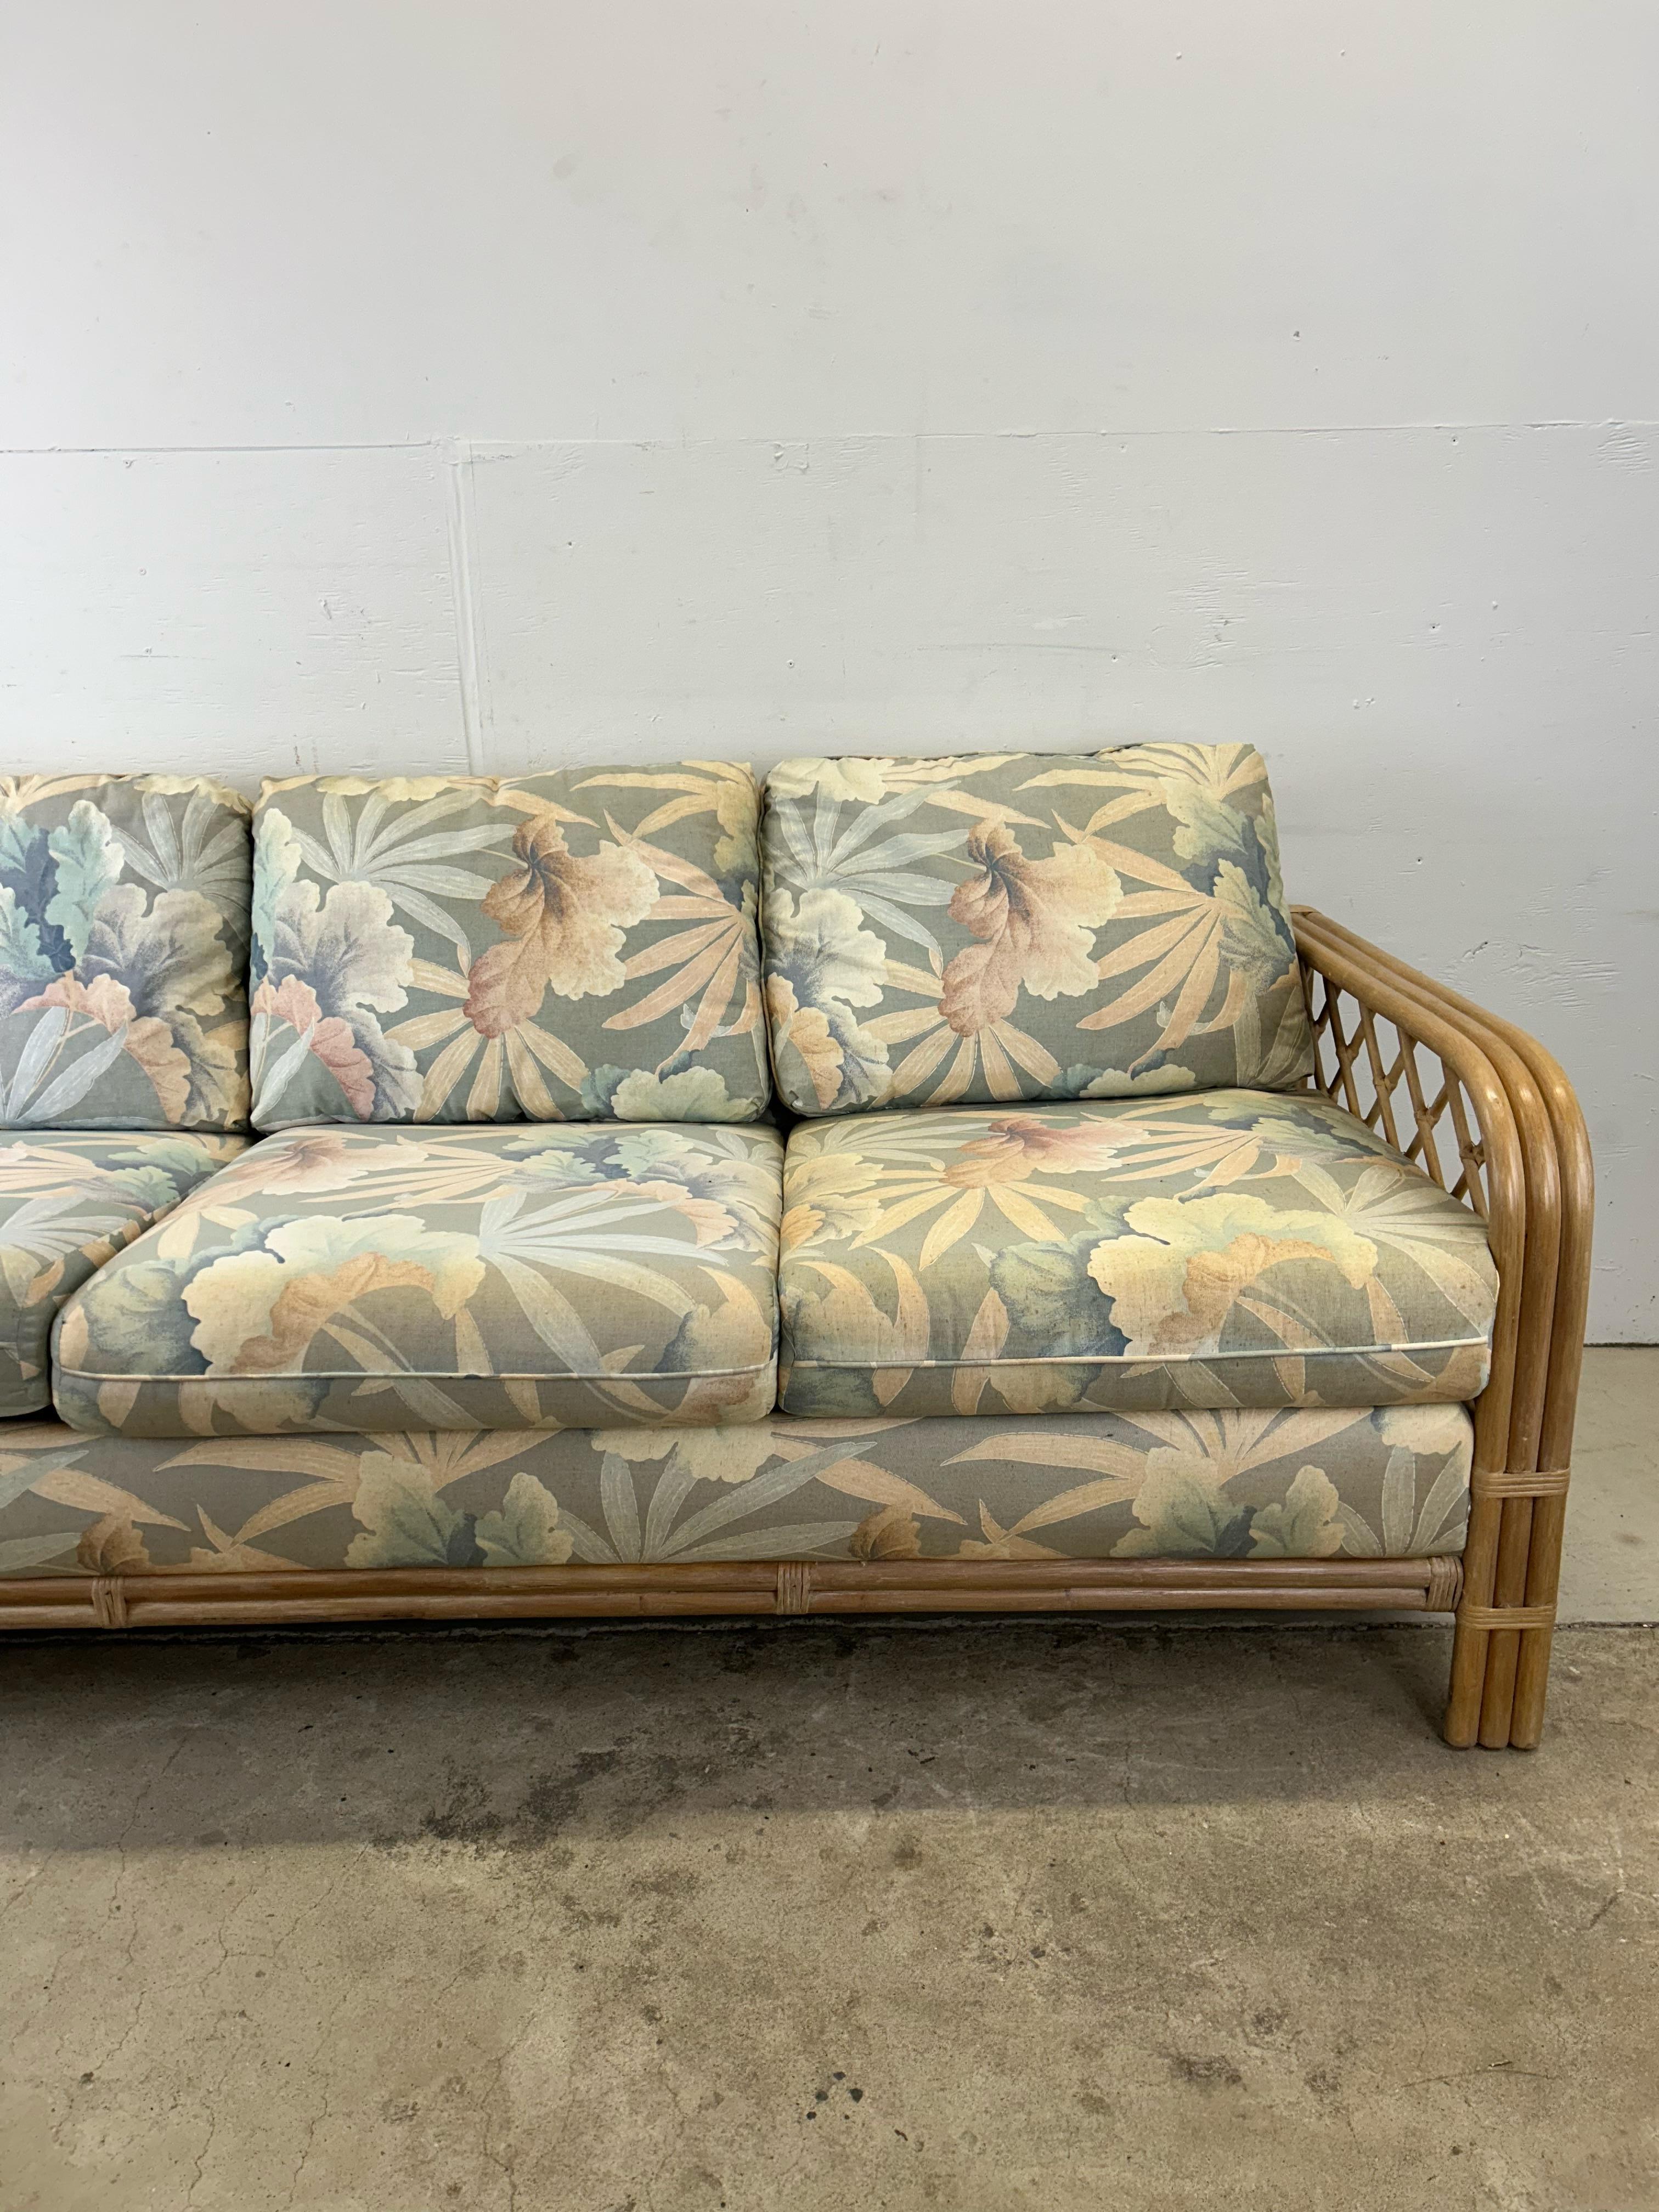 Vintage Boho Chic Rattan 3 Seater Sofa with Floral Upholstery In Good Condition For Sale In Freehold, NJ